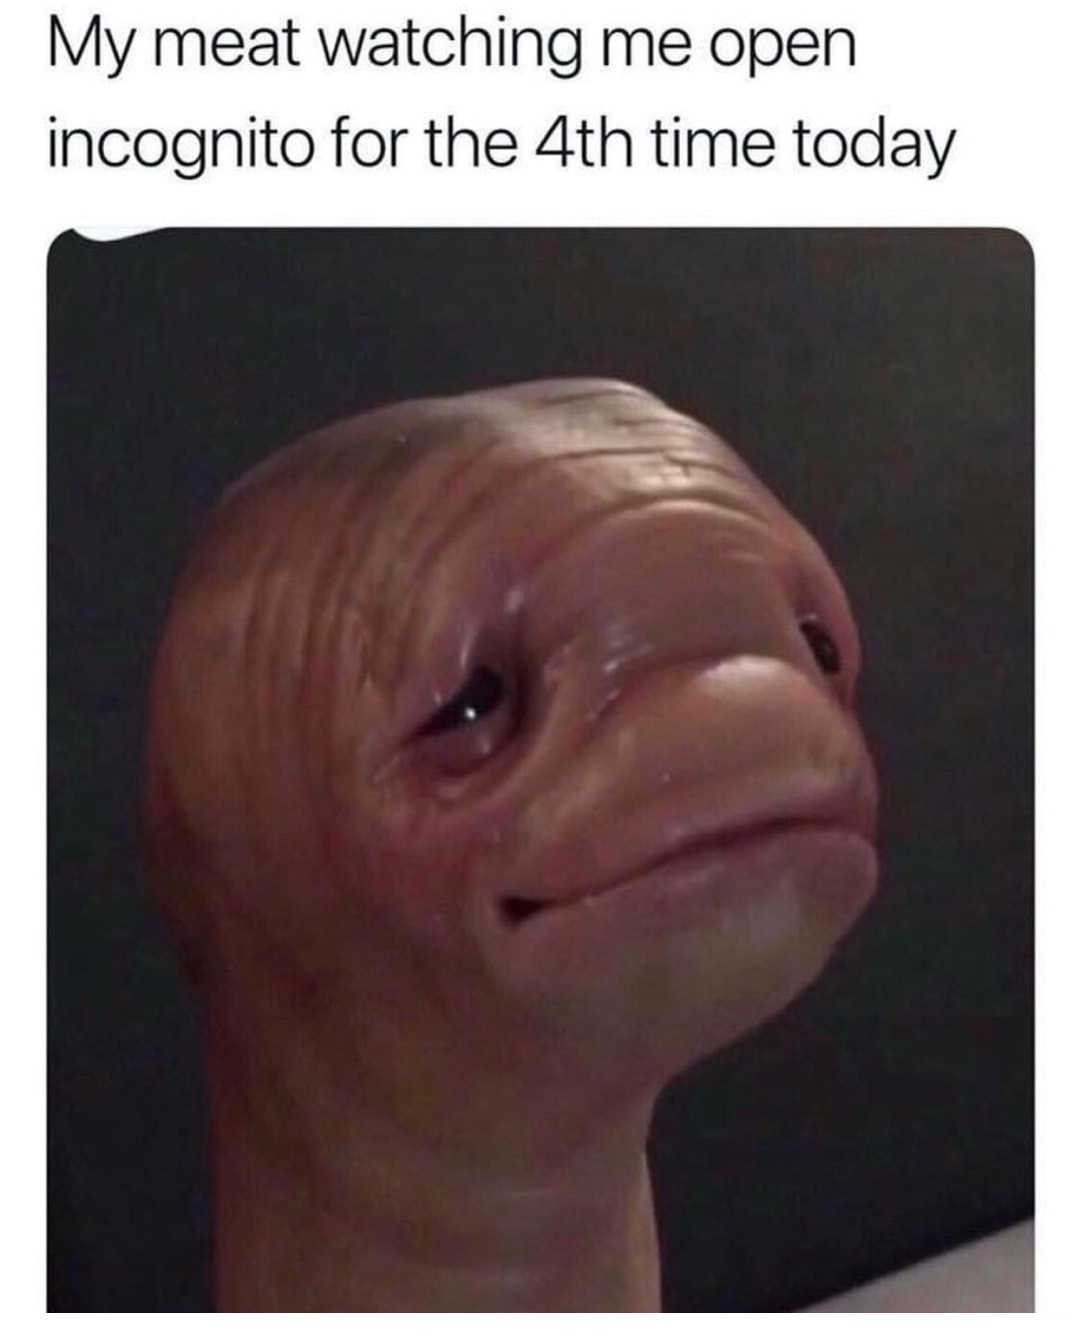 dank meme make your friends laugh - My meat watching me open incognito for the 4th time today